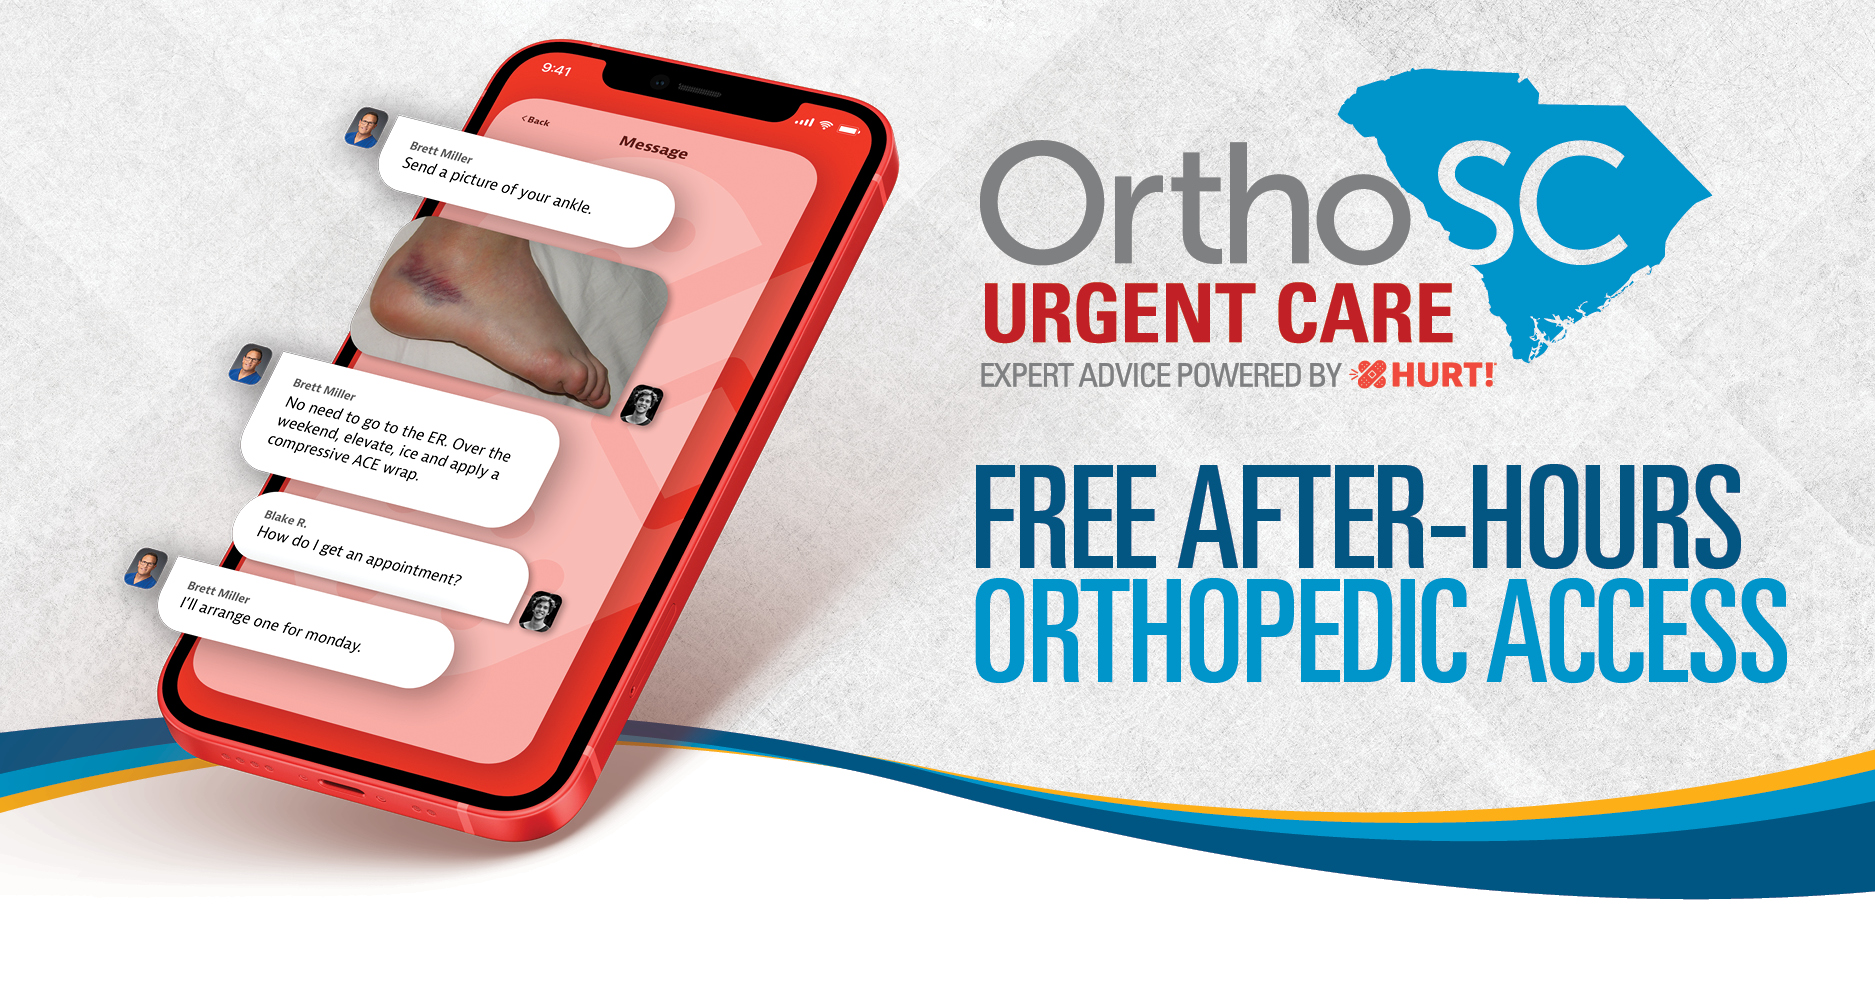 Urgent Care – Free After-Hours Orthopedic Access